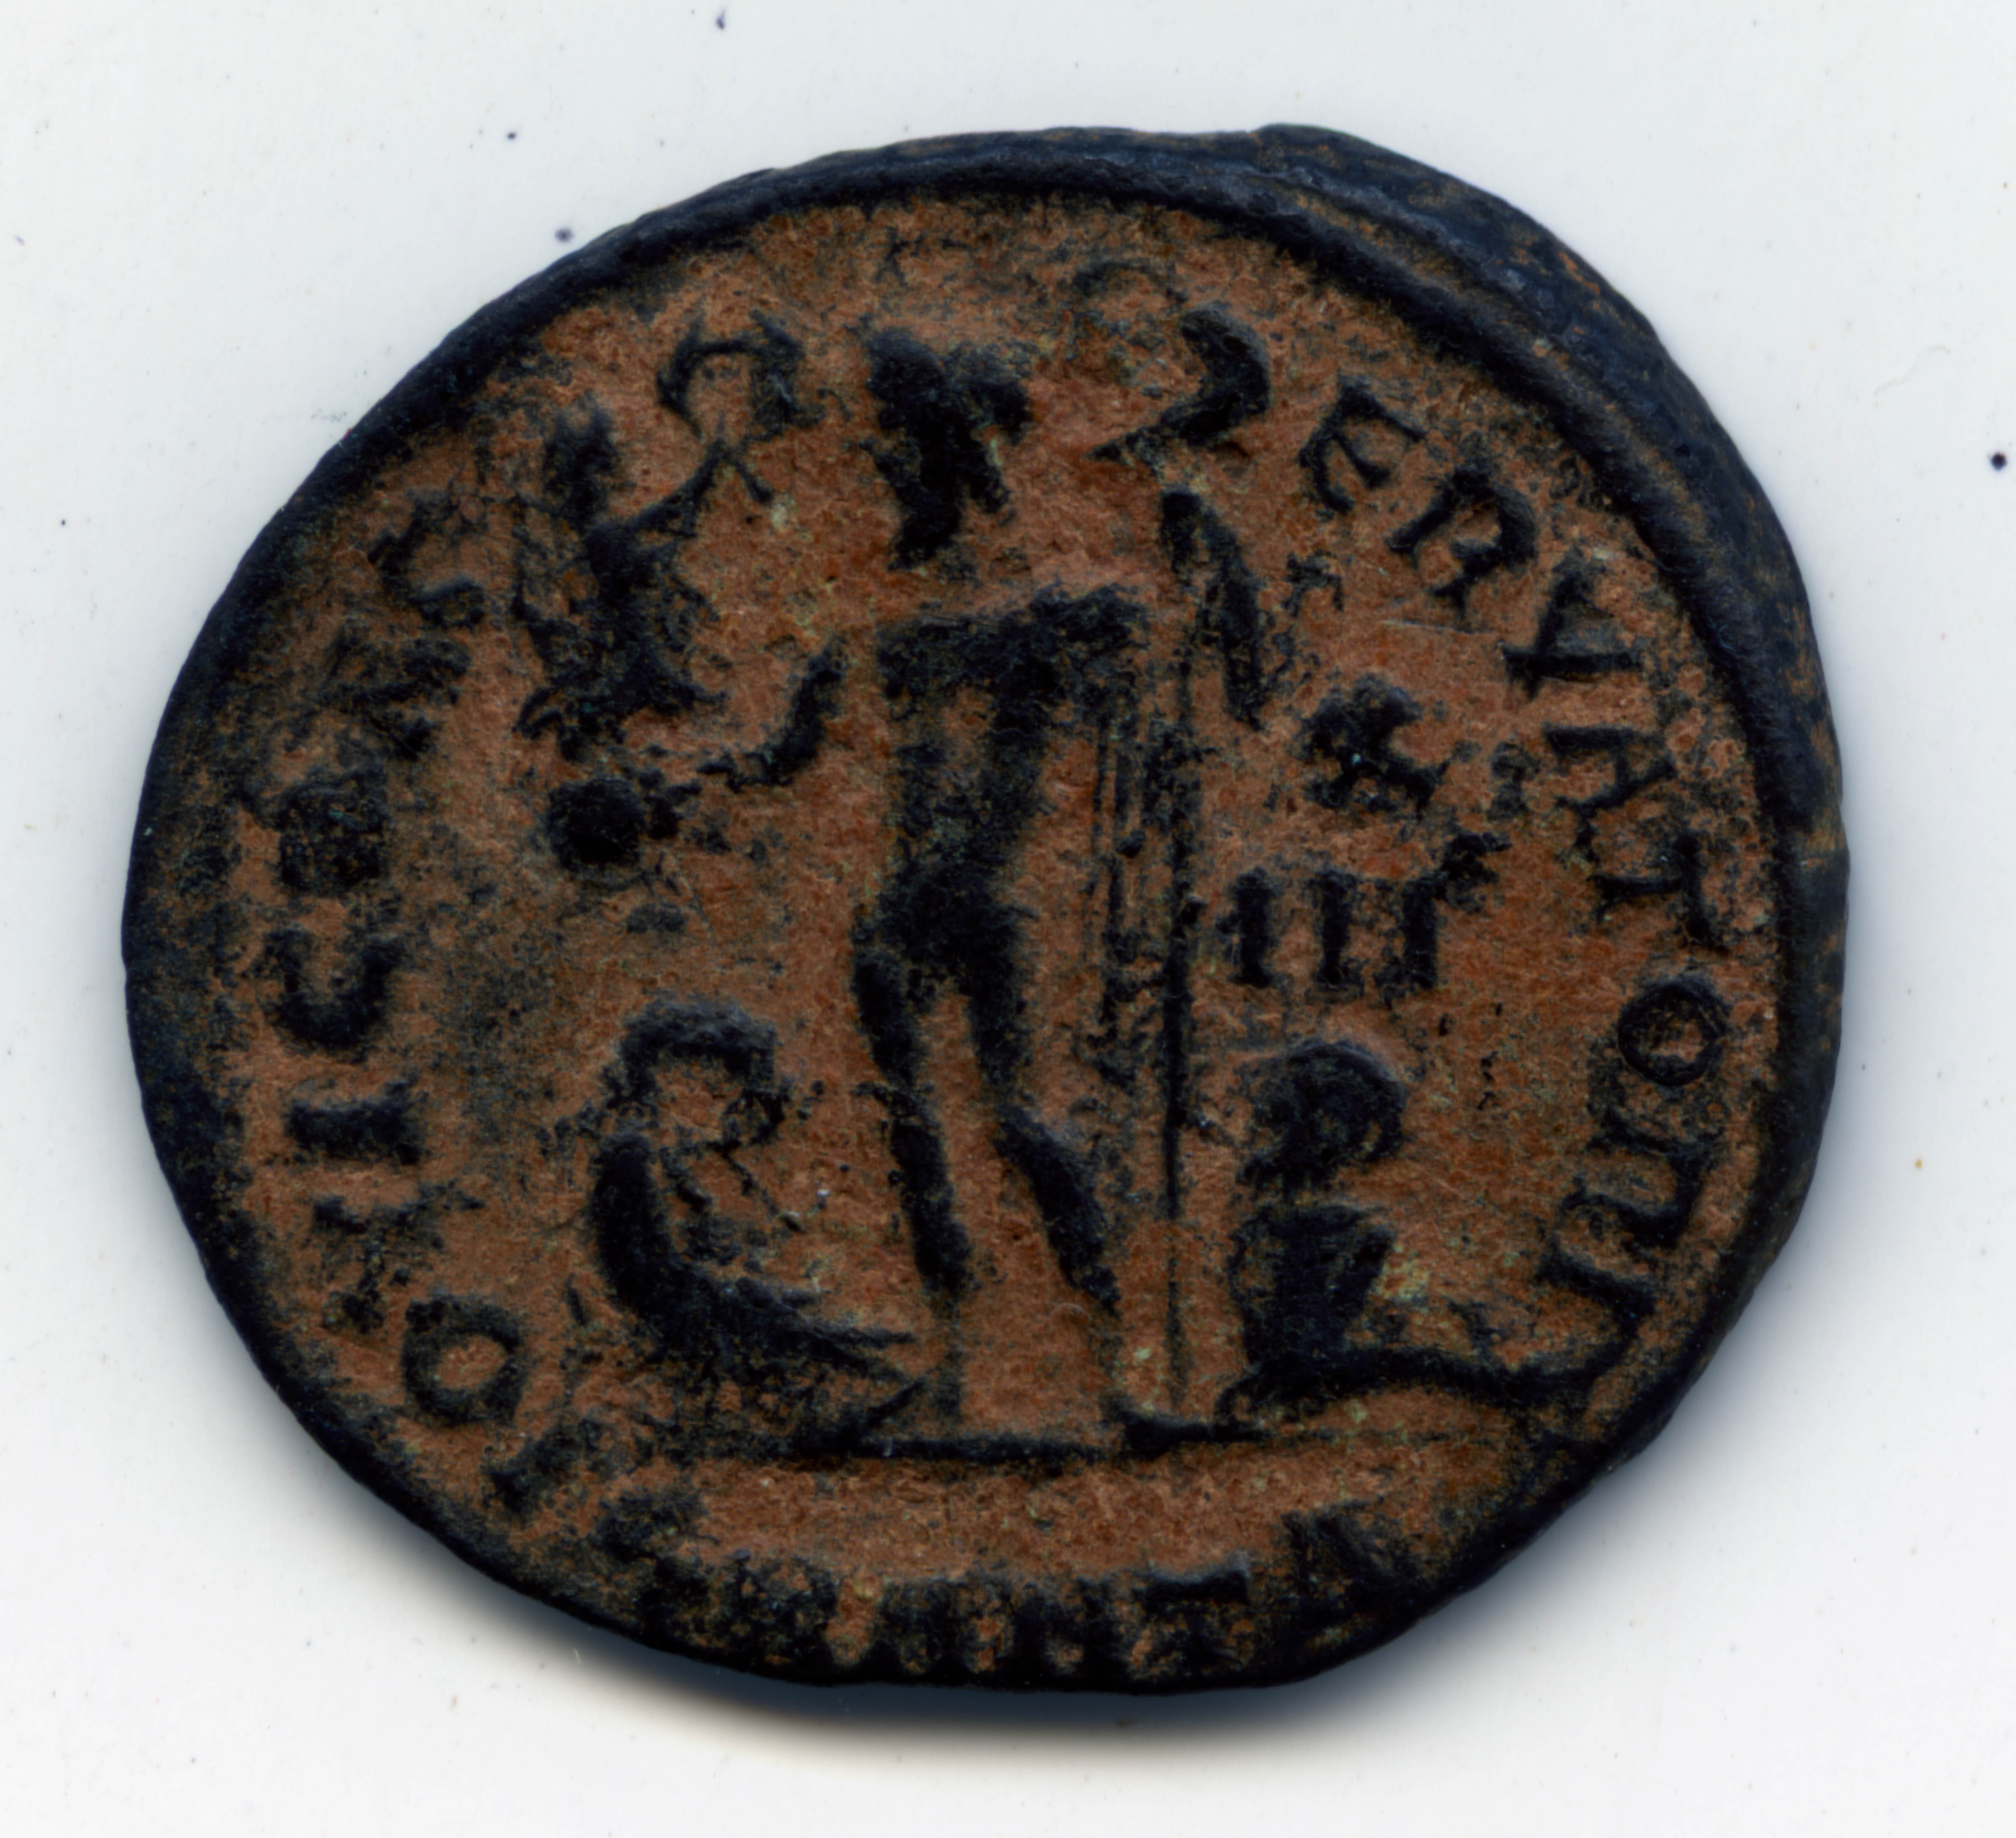 Image of coin 069 reverse